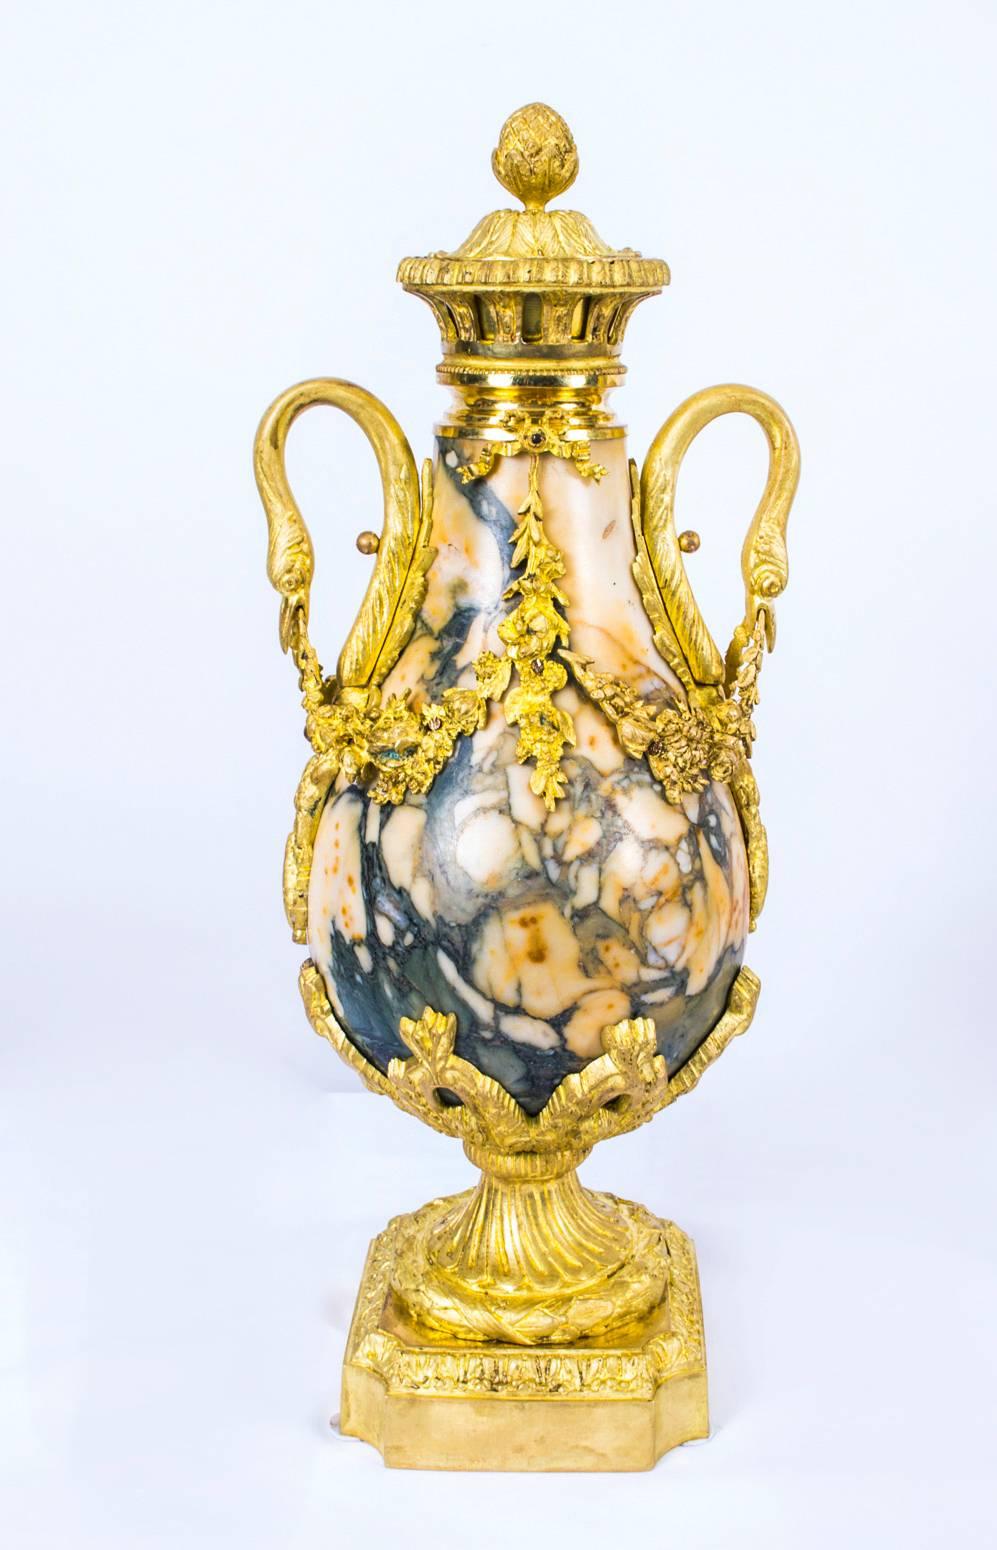 This is a magnificent antique pair of French figured Carrara marble and gilded bronze urns in the Louis XV manner and dating from circa 1870.

The urns feature gilt bronze gadrooned covers with acorn finials on pierced reeded necks. The pair of swan